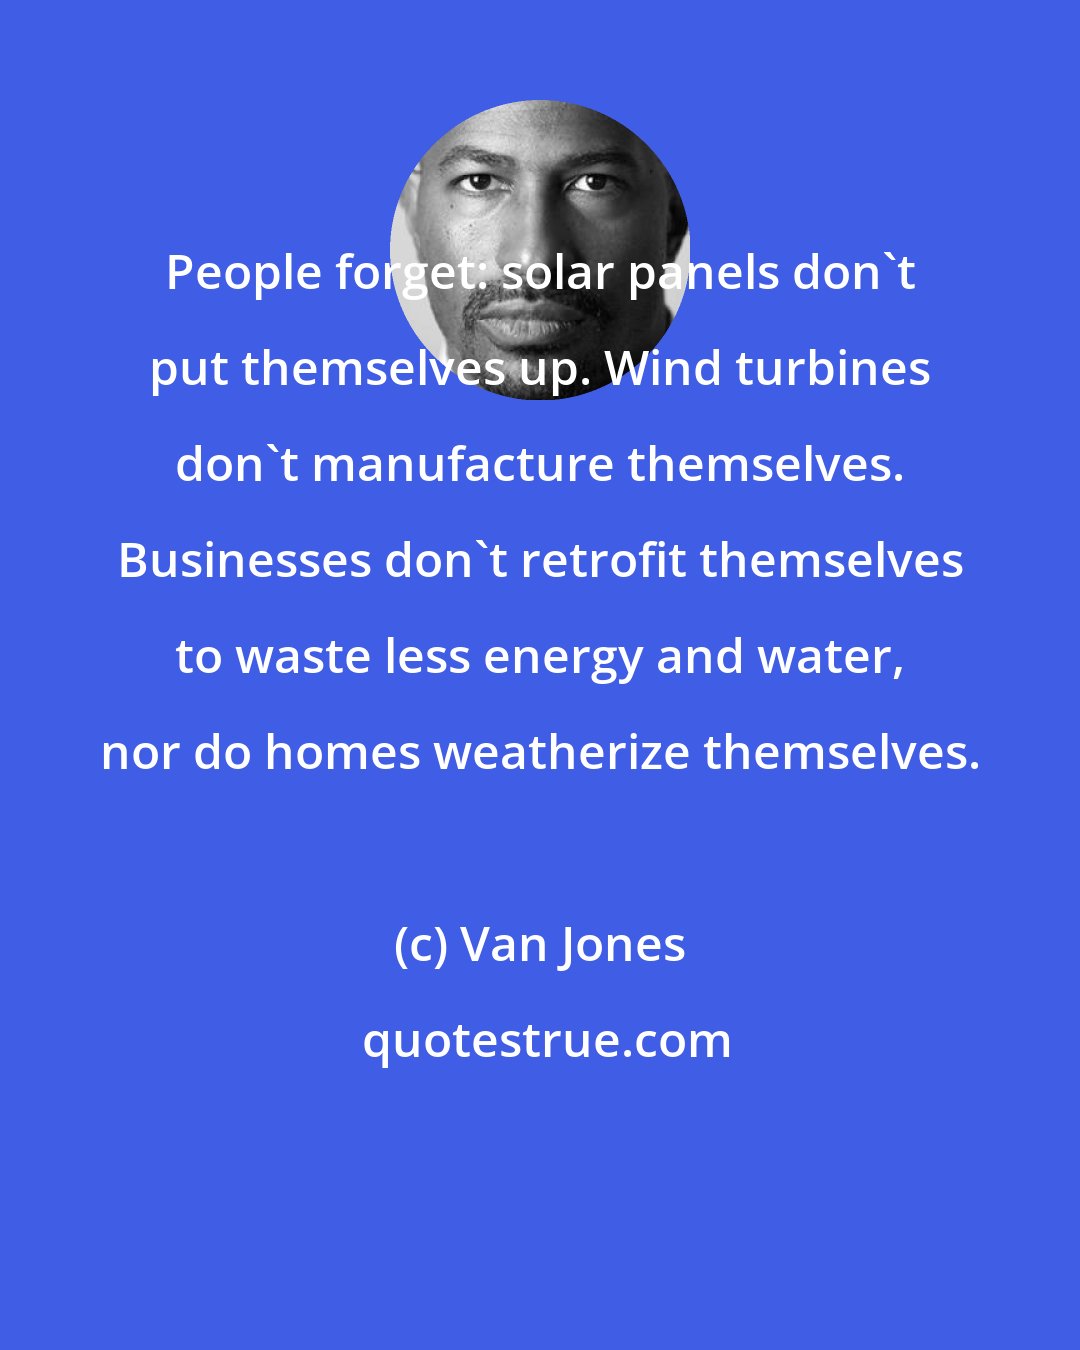 Van Jones: People forget: solar panels don't put themselves up. Wind turbines don't manufacture themselves. Businesses don't retrofit themselves to waste less energy and water, nor do homes weatherize themselves.